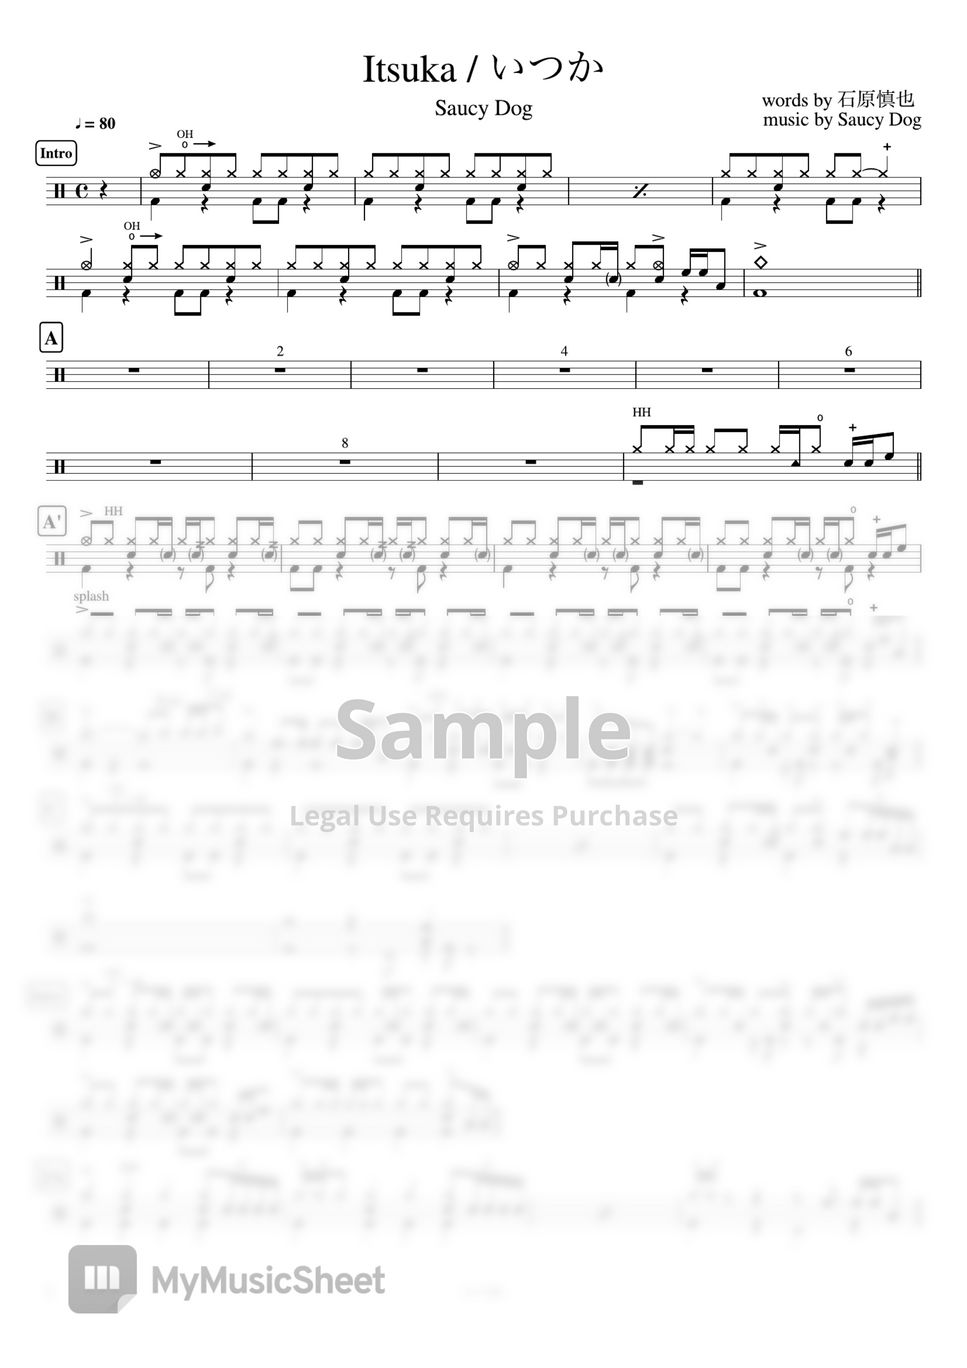 Saucy Dog - Itsuka / いつか by Cookai's J-pop Drum sheet music!!!